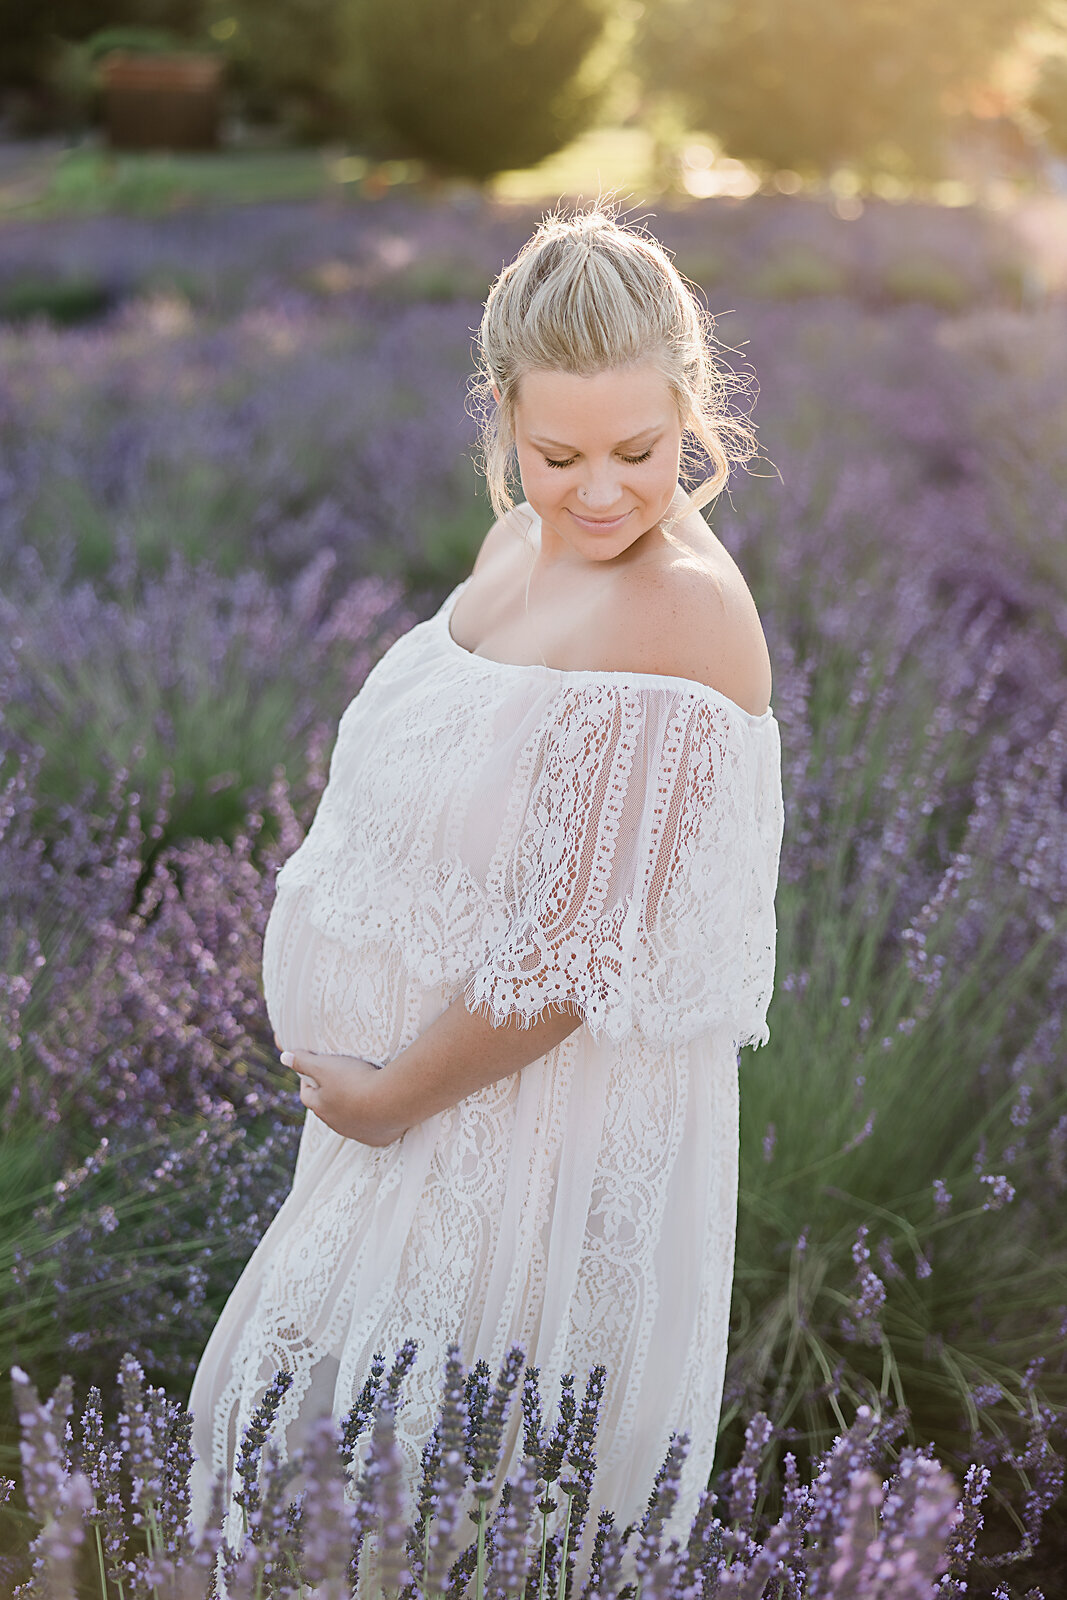 portland maternity photography in lavender field by ann marshall